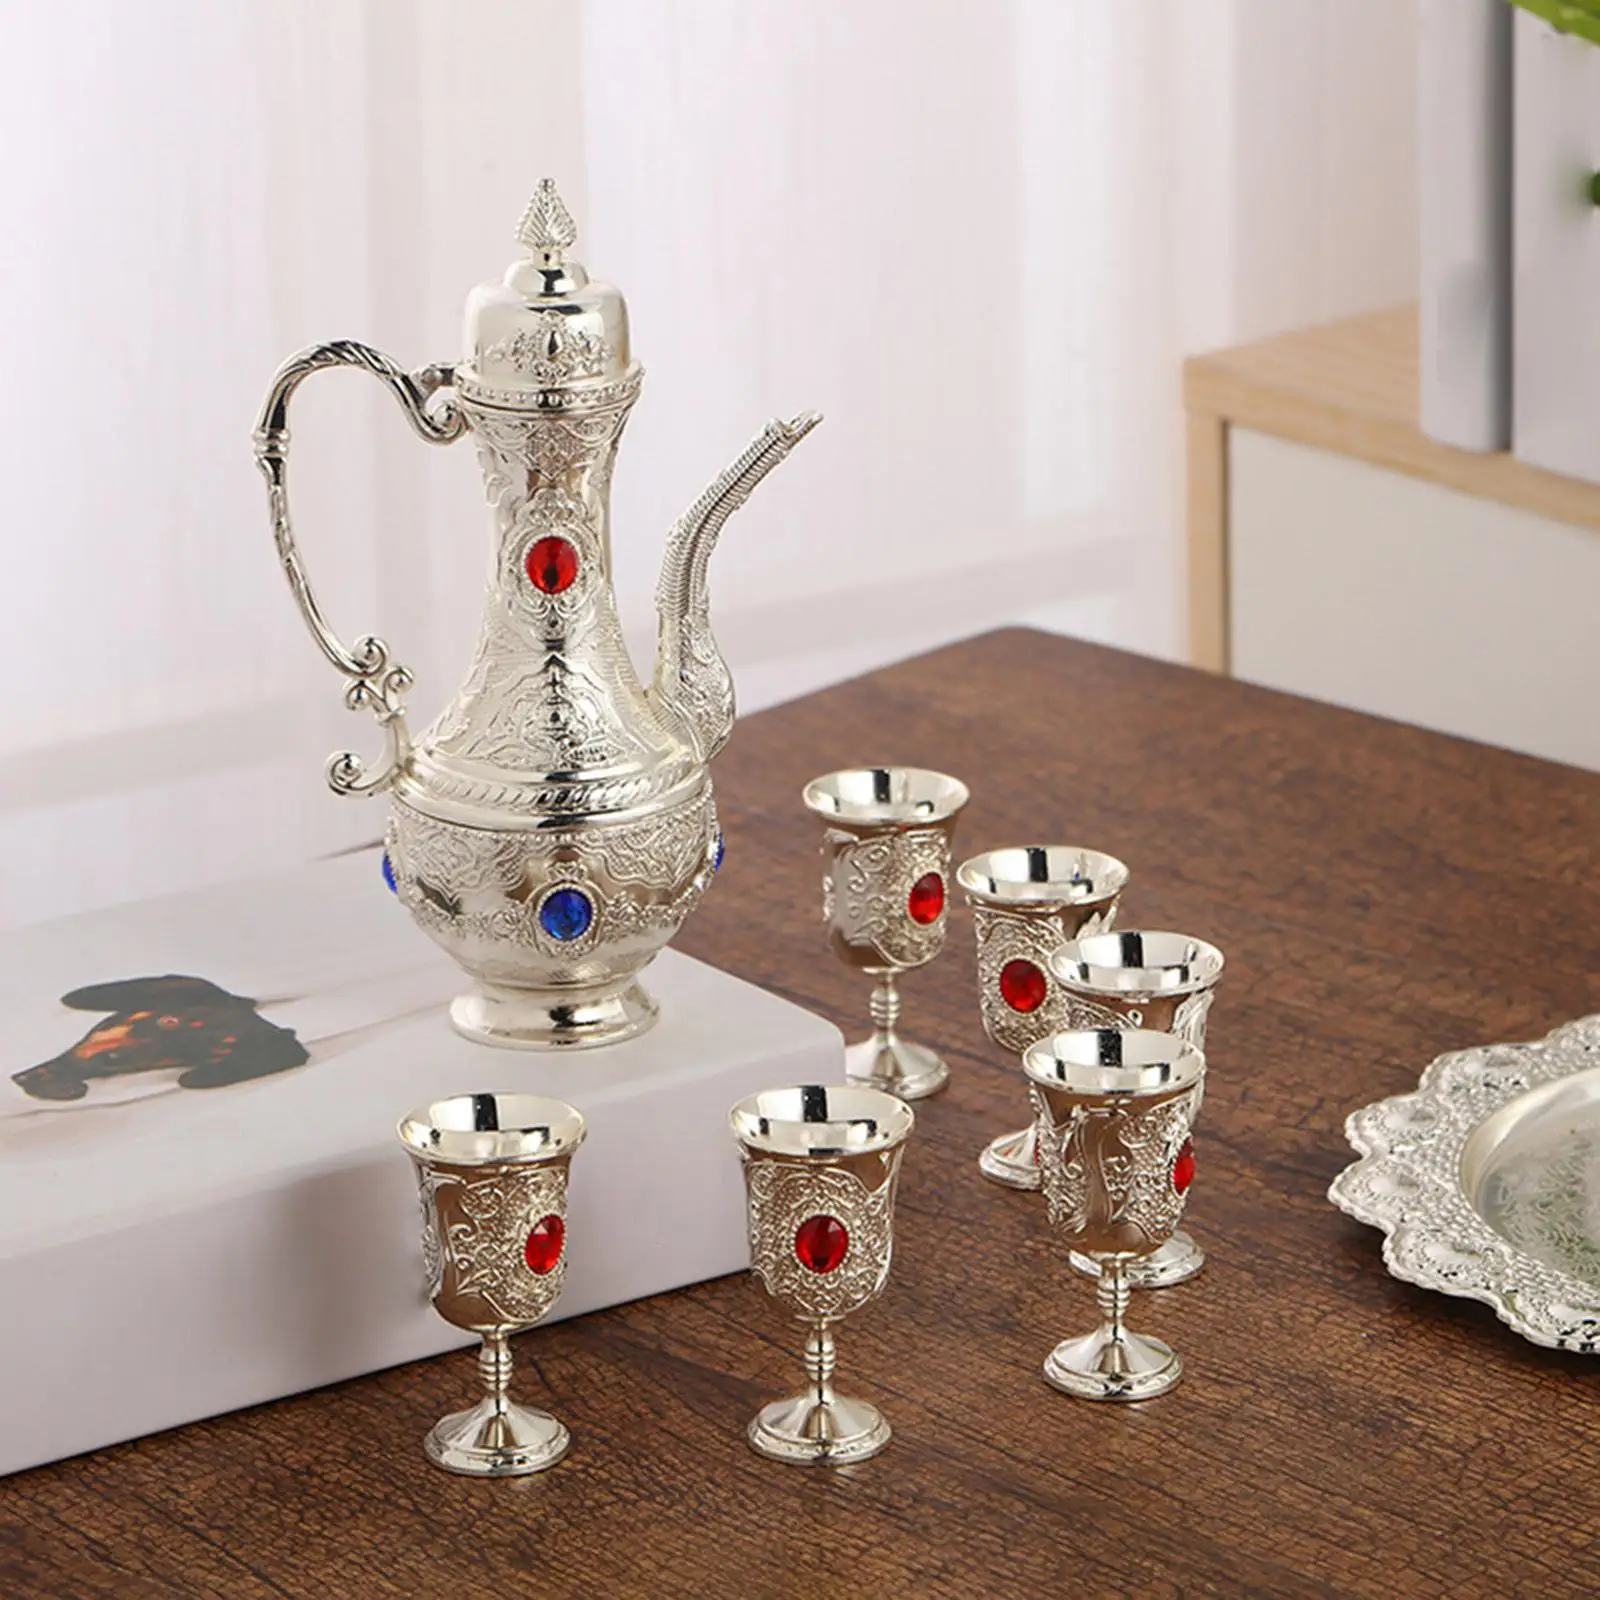 6 Pieces Europe Russian Style Wine Drinking Cups Hip Flask Set with Serving Tray Wedding Gift Wine Glass Jug Set for Ornament